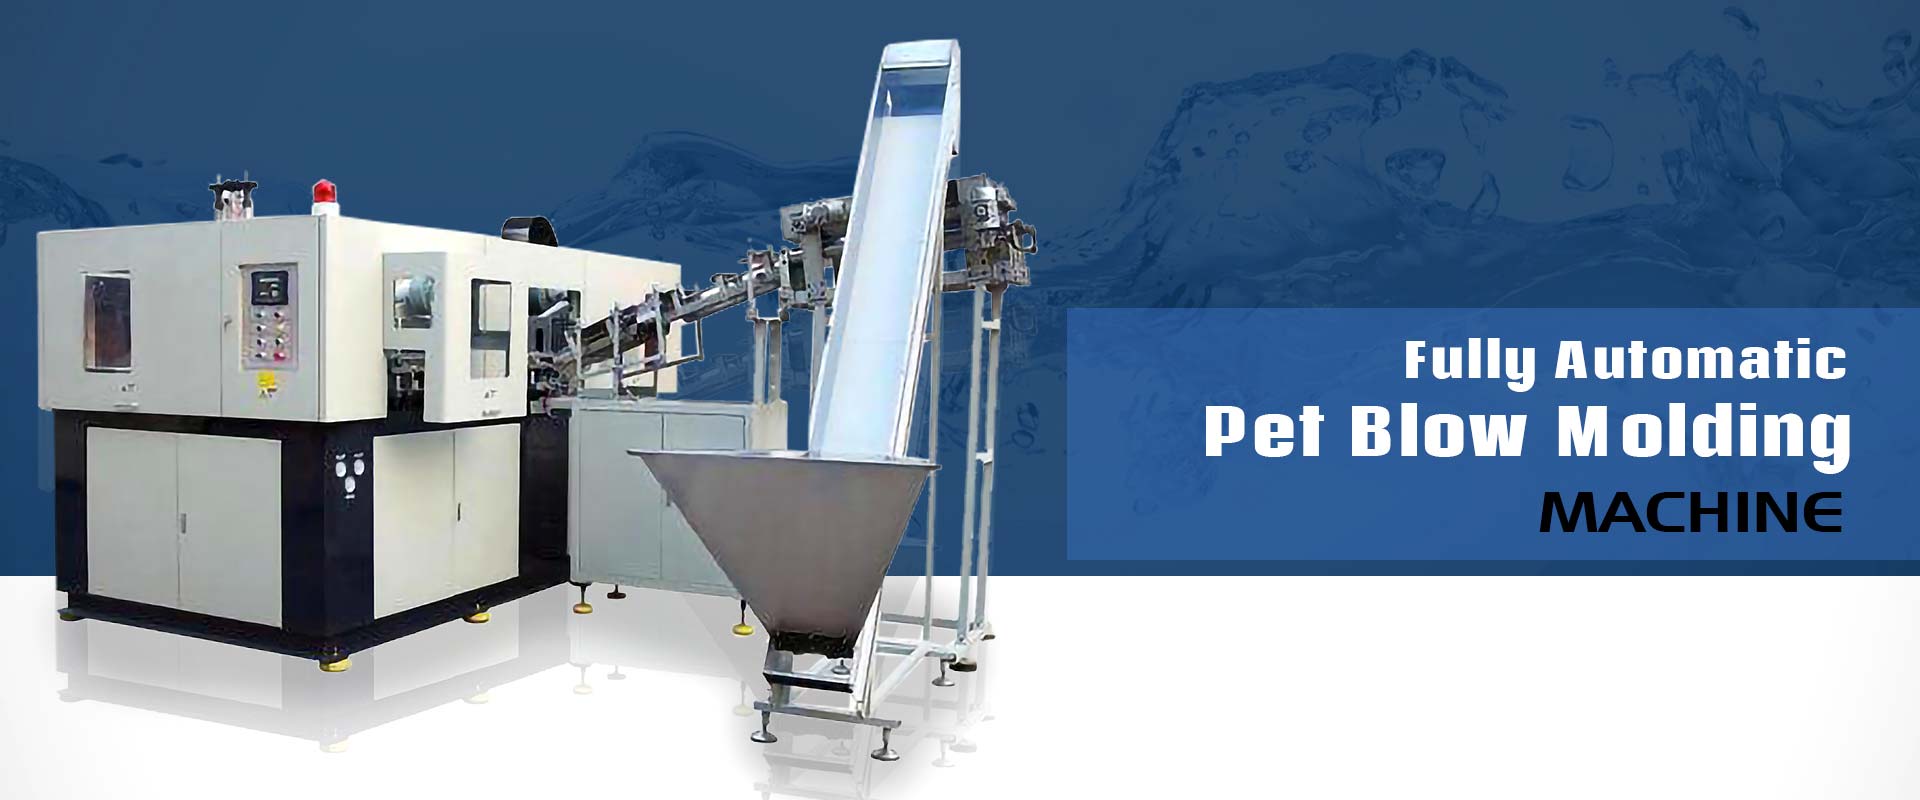 Fully Automatic Pet Blow Molding Machine In Beyla